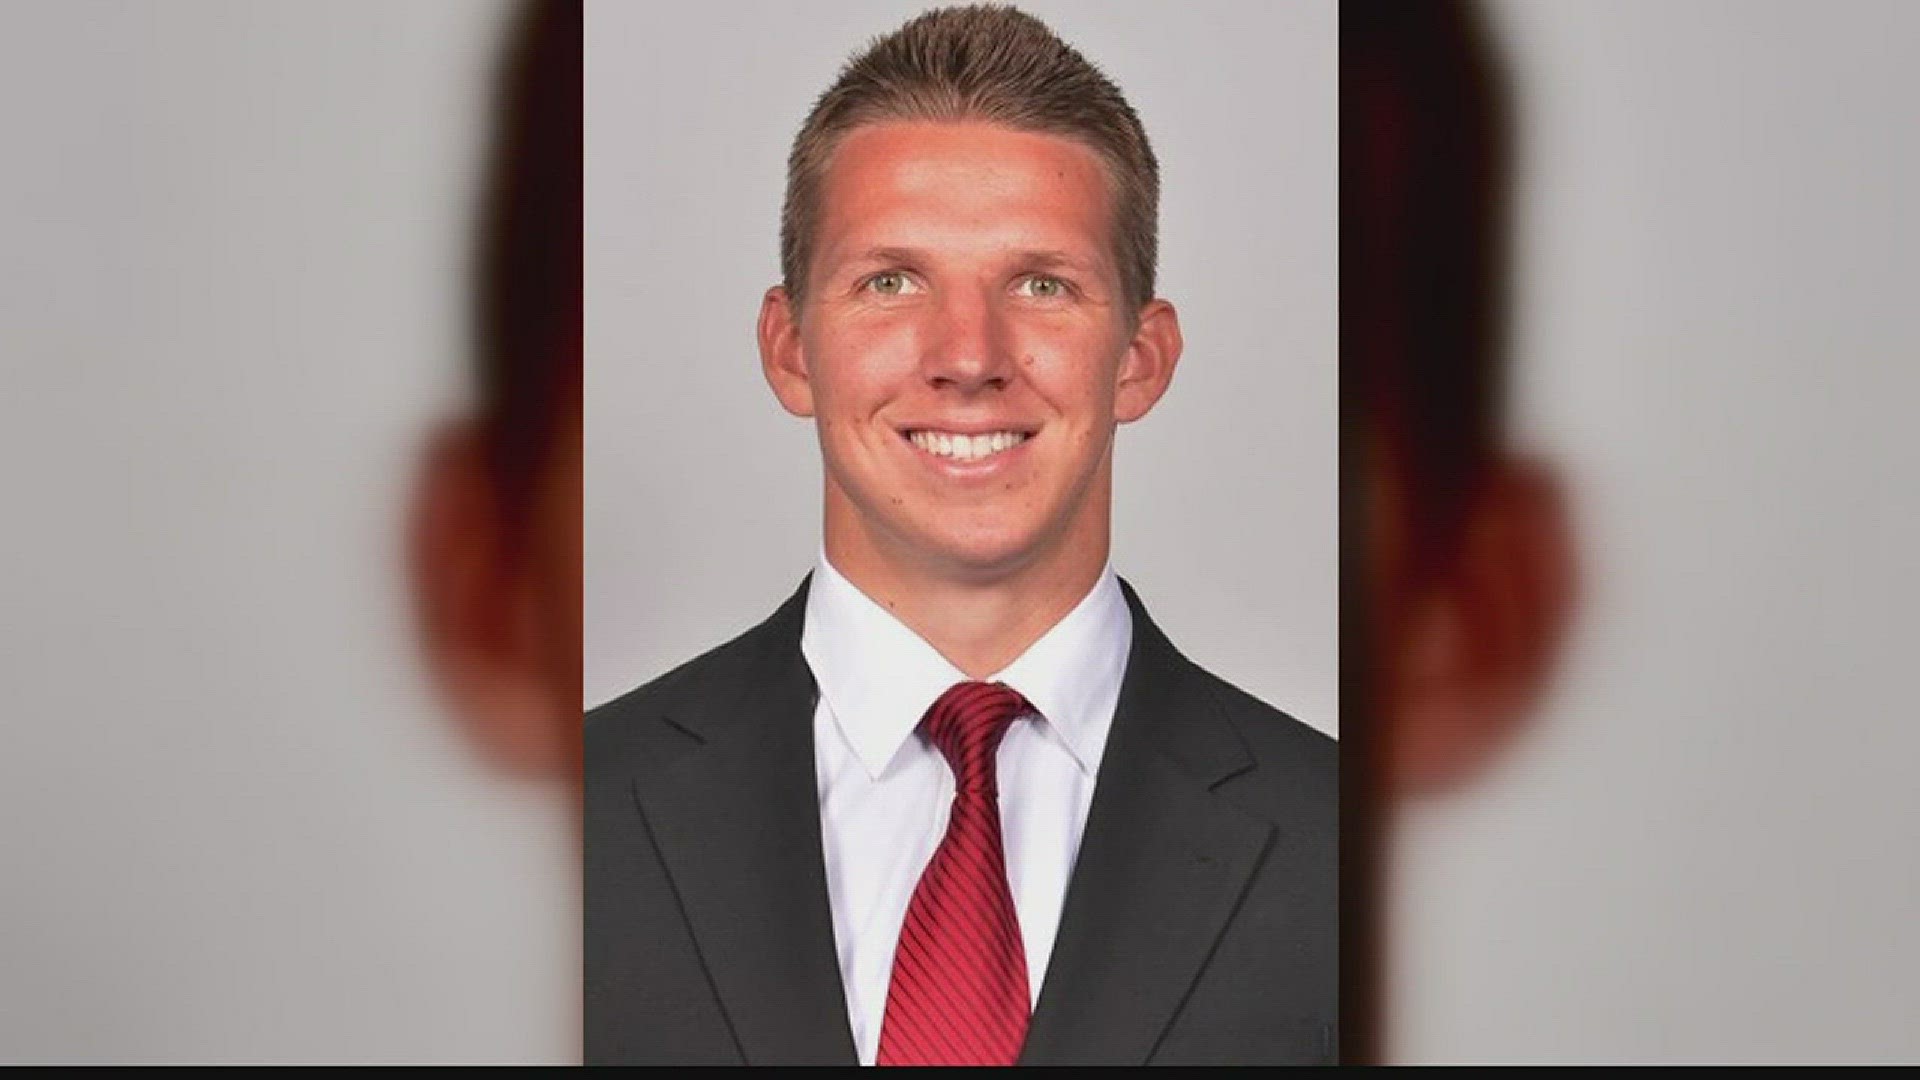 Washington State University Quarterback Tyler Hilinski, 21, was found dead in an apartment in Pullman on Tuesday afternoon of an apparent suicide. The sports world is mourning the loss of a life gone too soon.